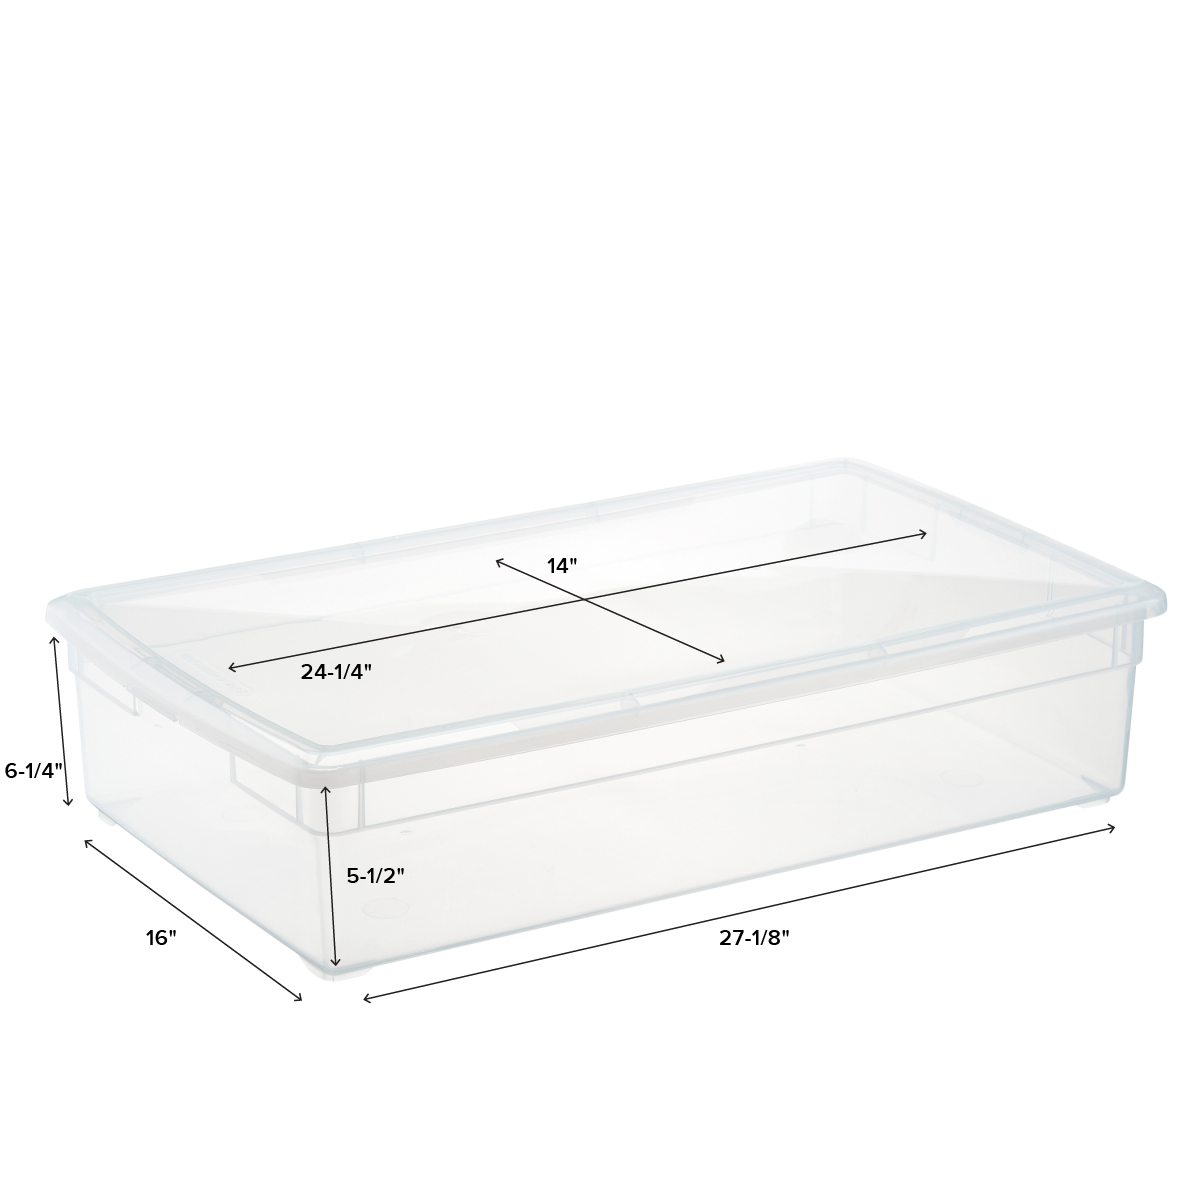 Compartment Tray 16-inch Clear Plastic 